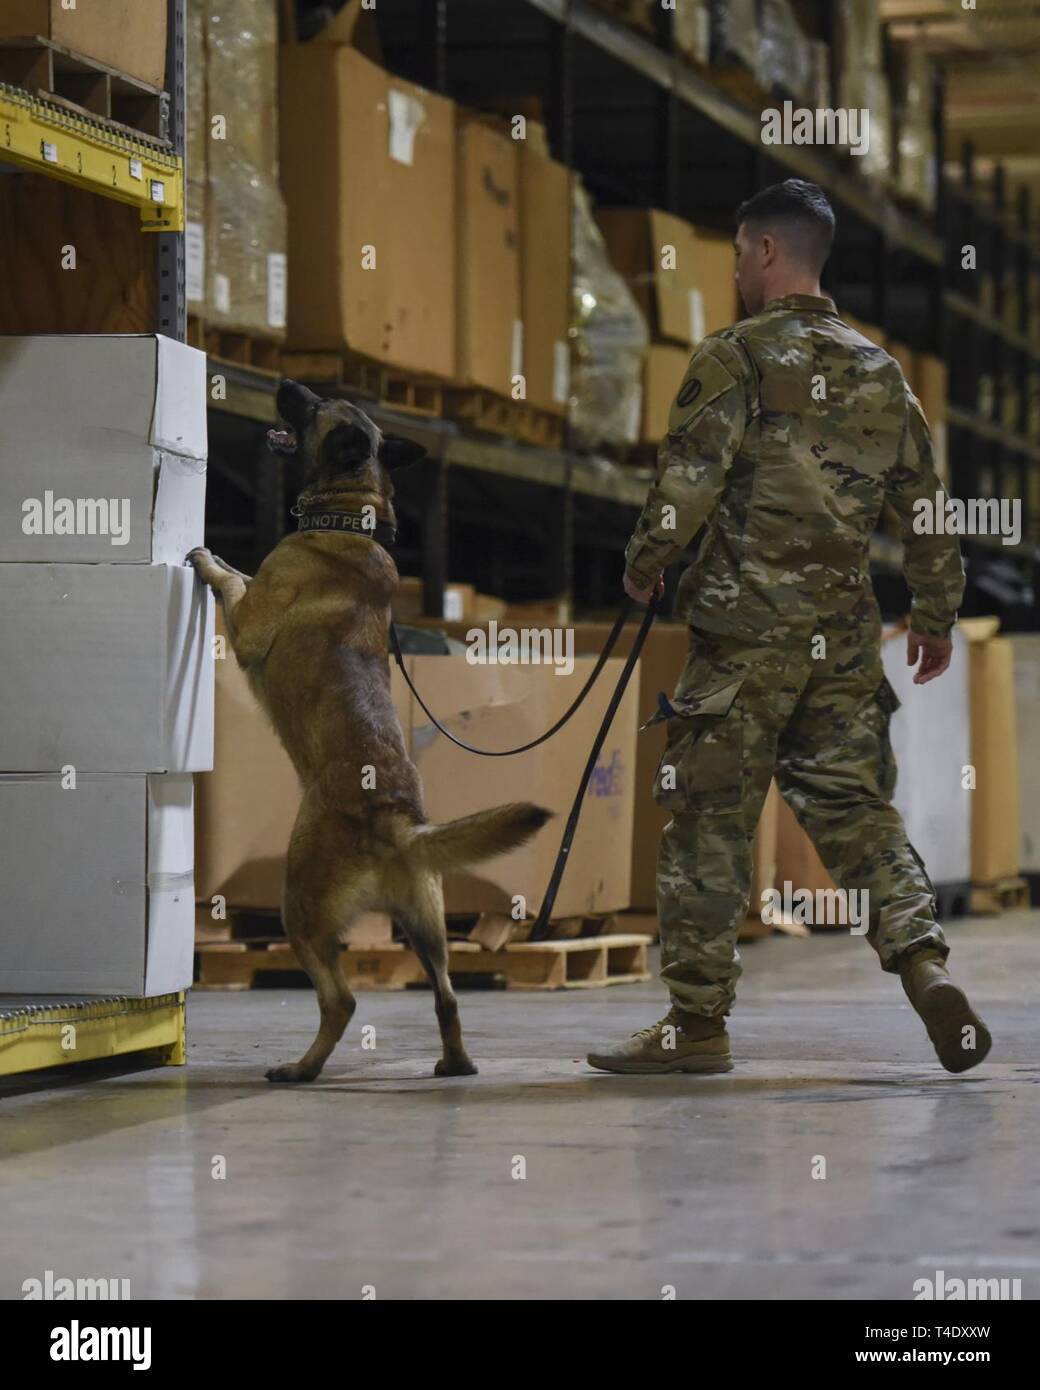 A military working dog handler and his canine partner search a warehouse for peroxide scents at Joint Base Langley-Eustis, Virginia, March 22, 2019. Federal Bureau of Investigation special agents evaluated MWD detection techniques during a peroxide scents training. Stock Photo